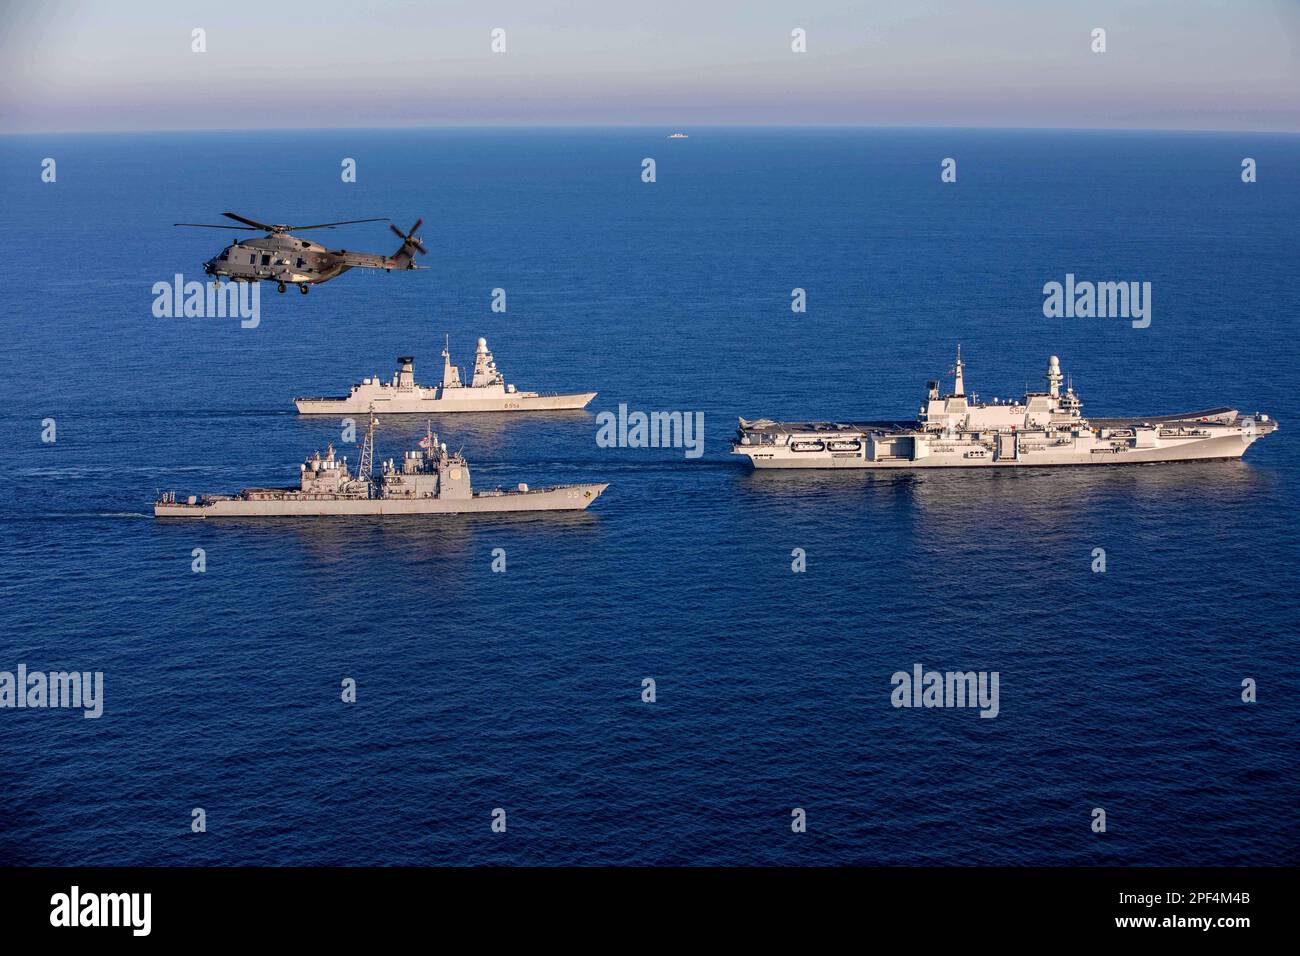 Ionian Sea. 21st Feb, 2023. 230221-N-TC847-1202 IONIAN SEA (February. 21, 2023) The Ticonderoga-class guided-missile cruiser USS Leyte Gulf (CG 55), bottom left, sails in formation with the Italian aircraft carrier ITS Cavour (C 550) and Orizzonte-class destroyer ITS Caio Duilio (D 554), right, February. 21, 2023. The George H.W. Bush Carrier Strike Group is on a scheduled deployment in the U.S. Naval Forces Europe area of operations, employed by U.S. Sixth Fleet to defend U.S., allied, and partner interests. Credit: U.S. Navy/ZUMA Press Wire Service/ZUMAPRESS.com/Alamy Live News Stock Photo